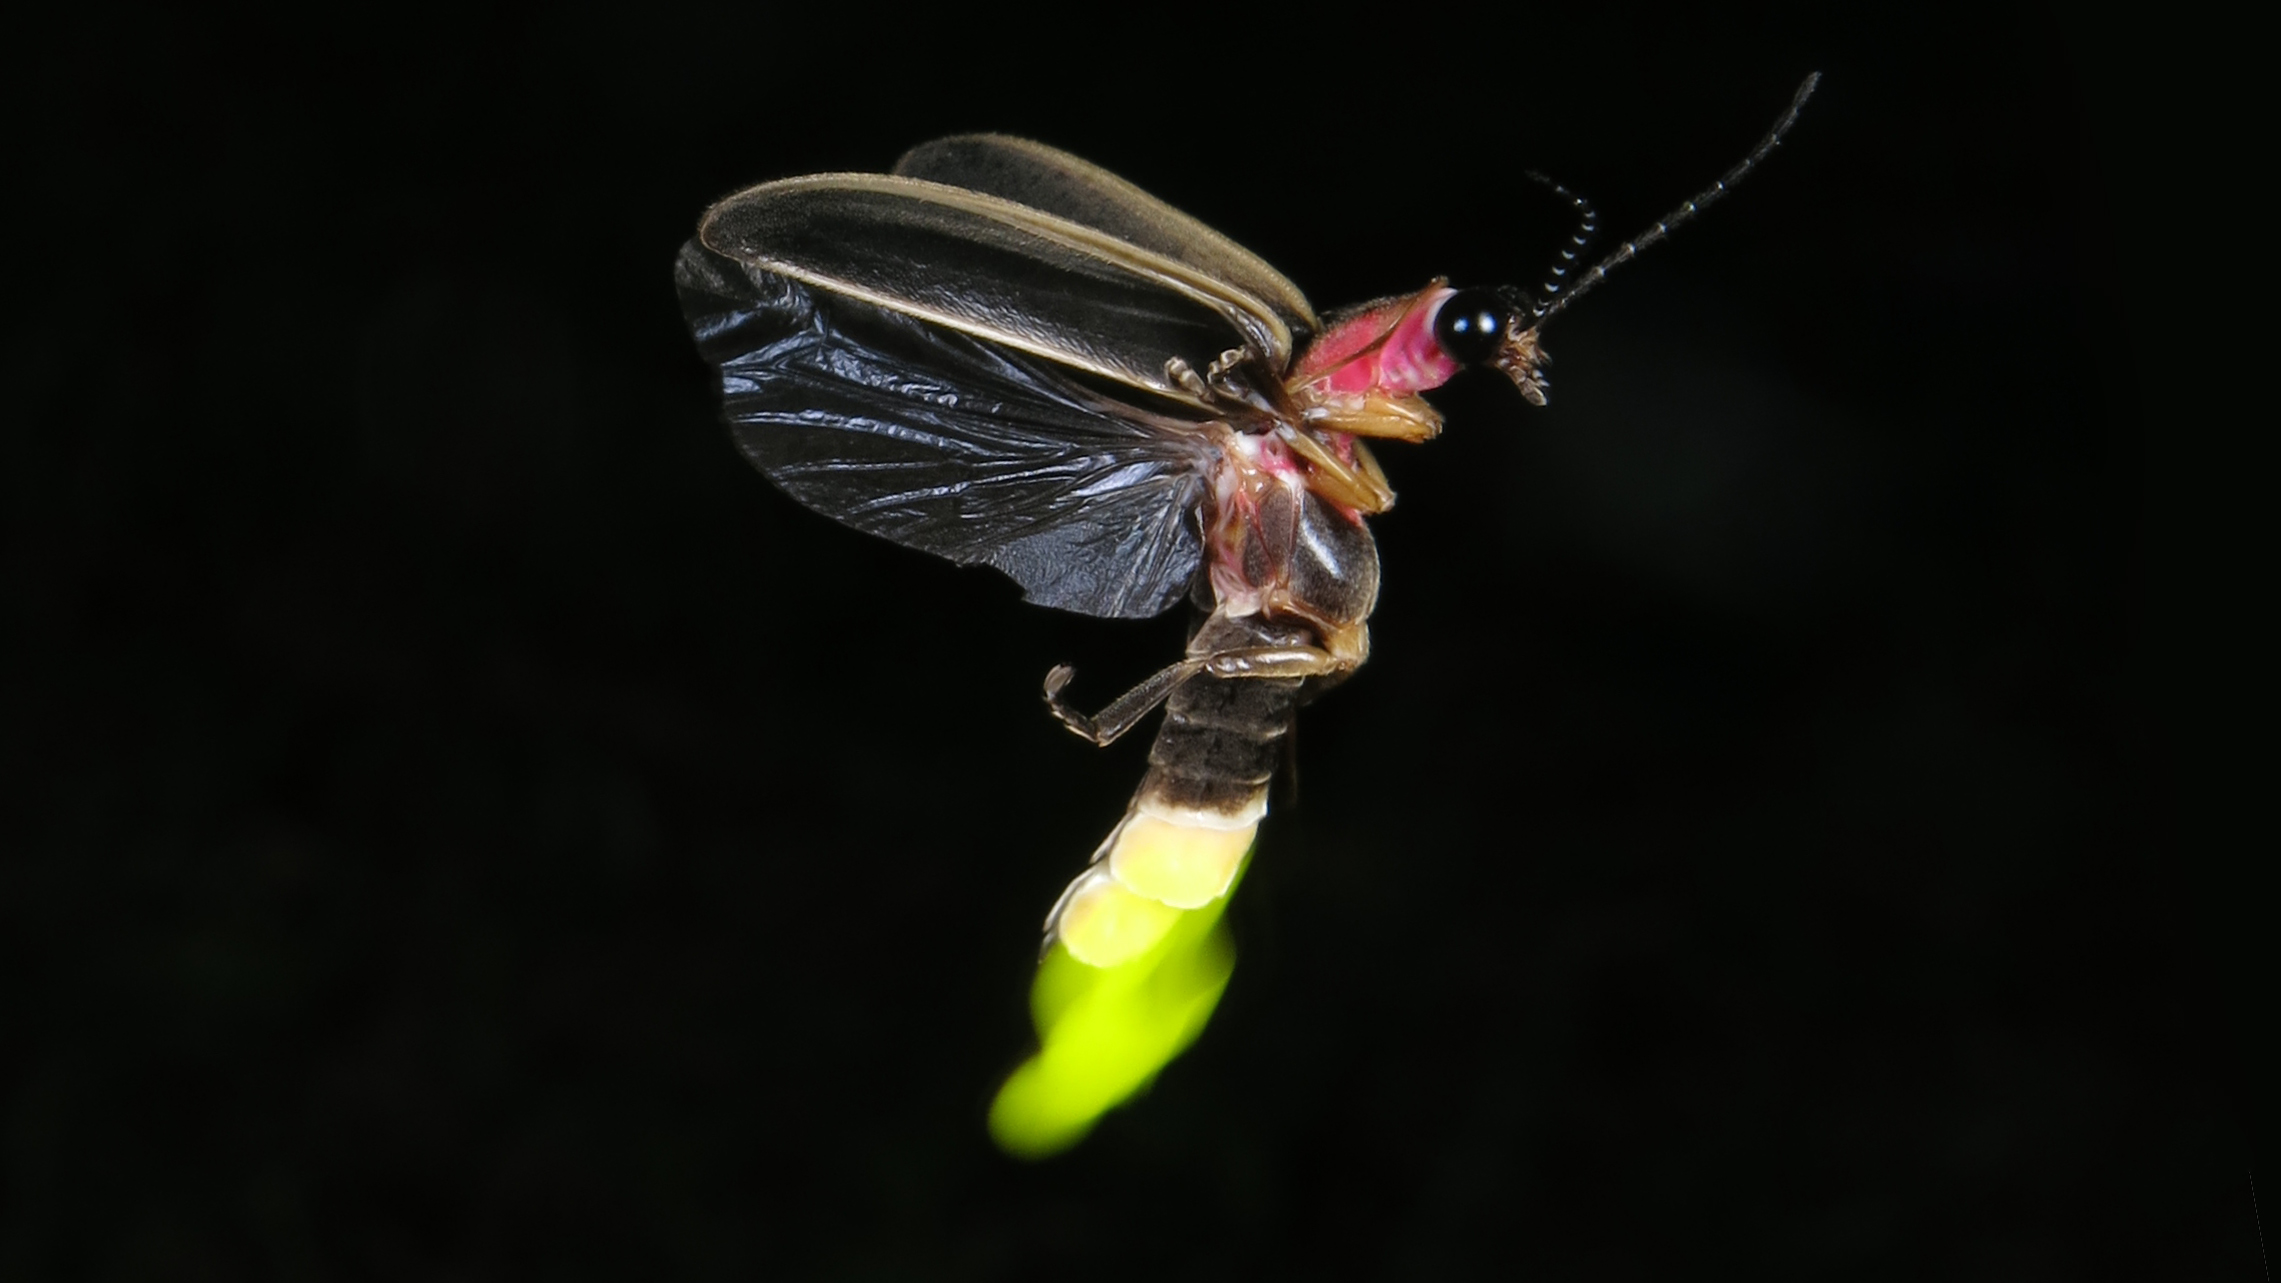 A firefly flashes green light while in flight.